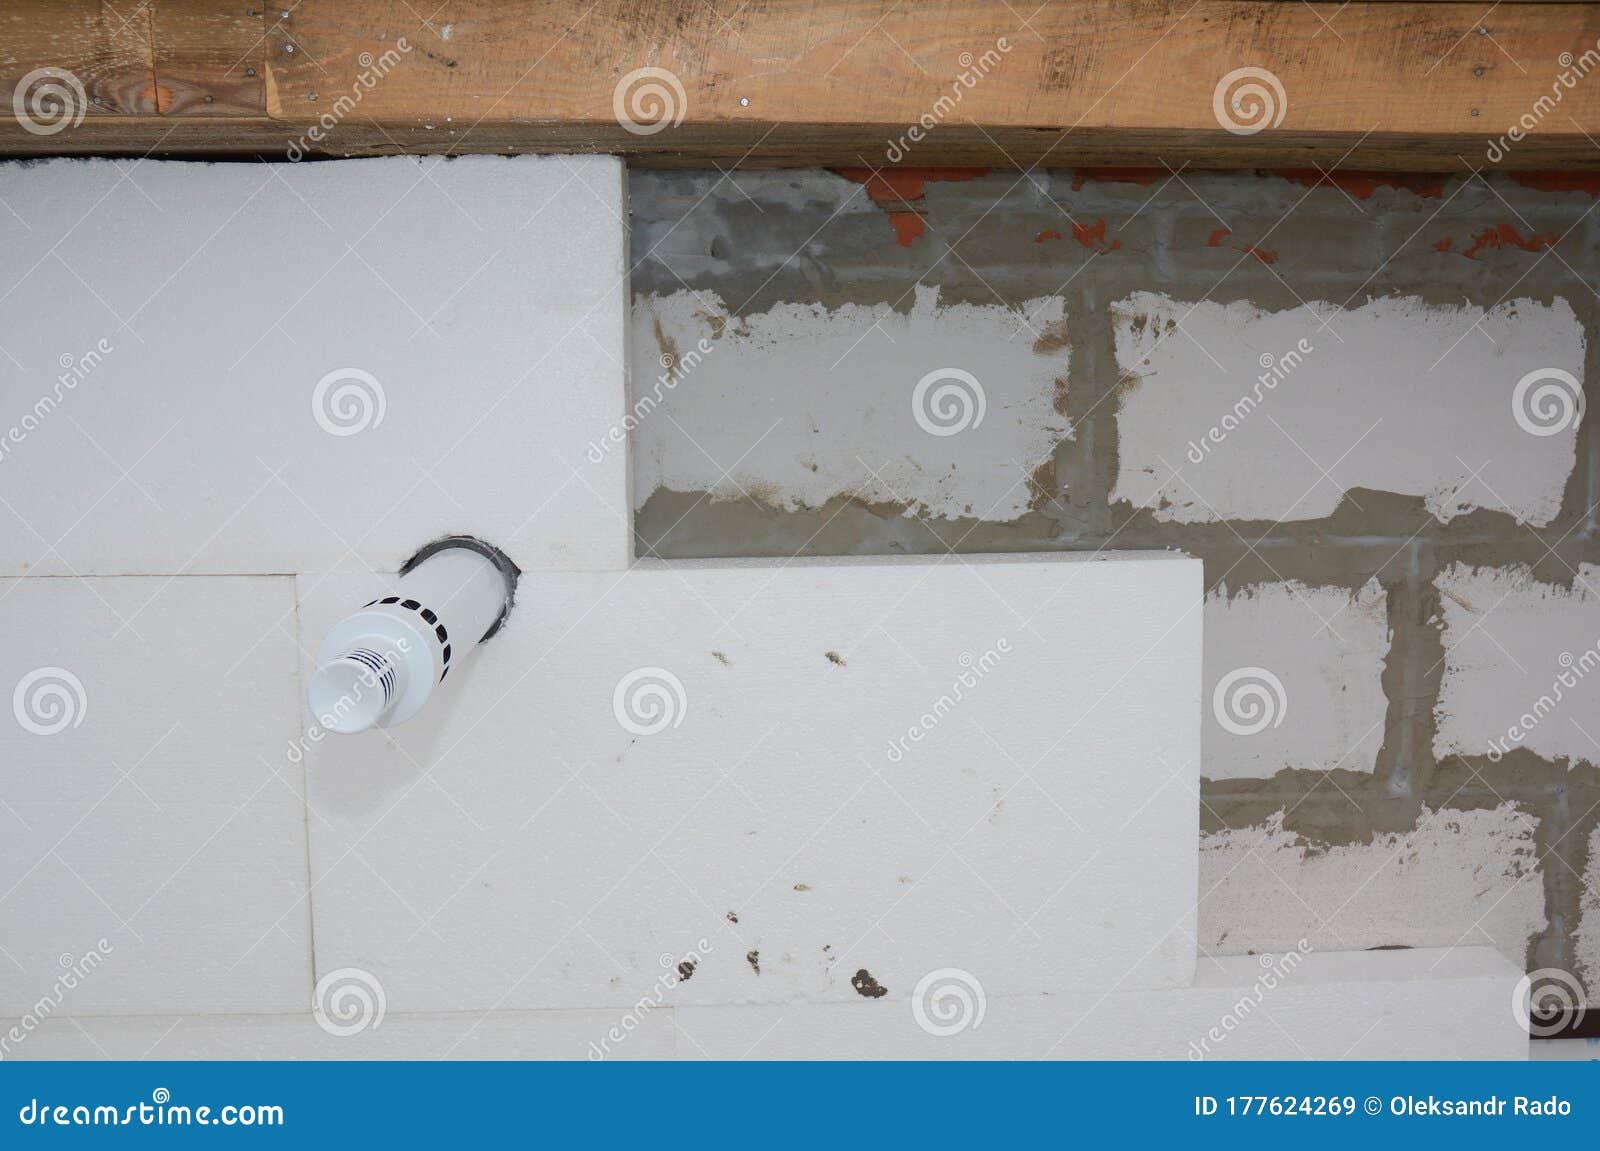 Installing Rigid Polystyrene Foam Board Insulation With Adhesive Or Glue On A Brick Wall With A Ventilation Pipe Stock Image Image Of Adhesive Concrete 177624269